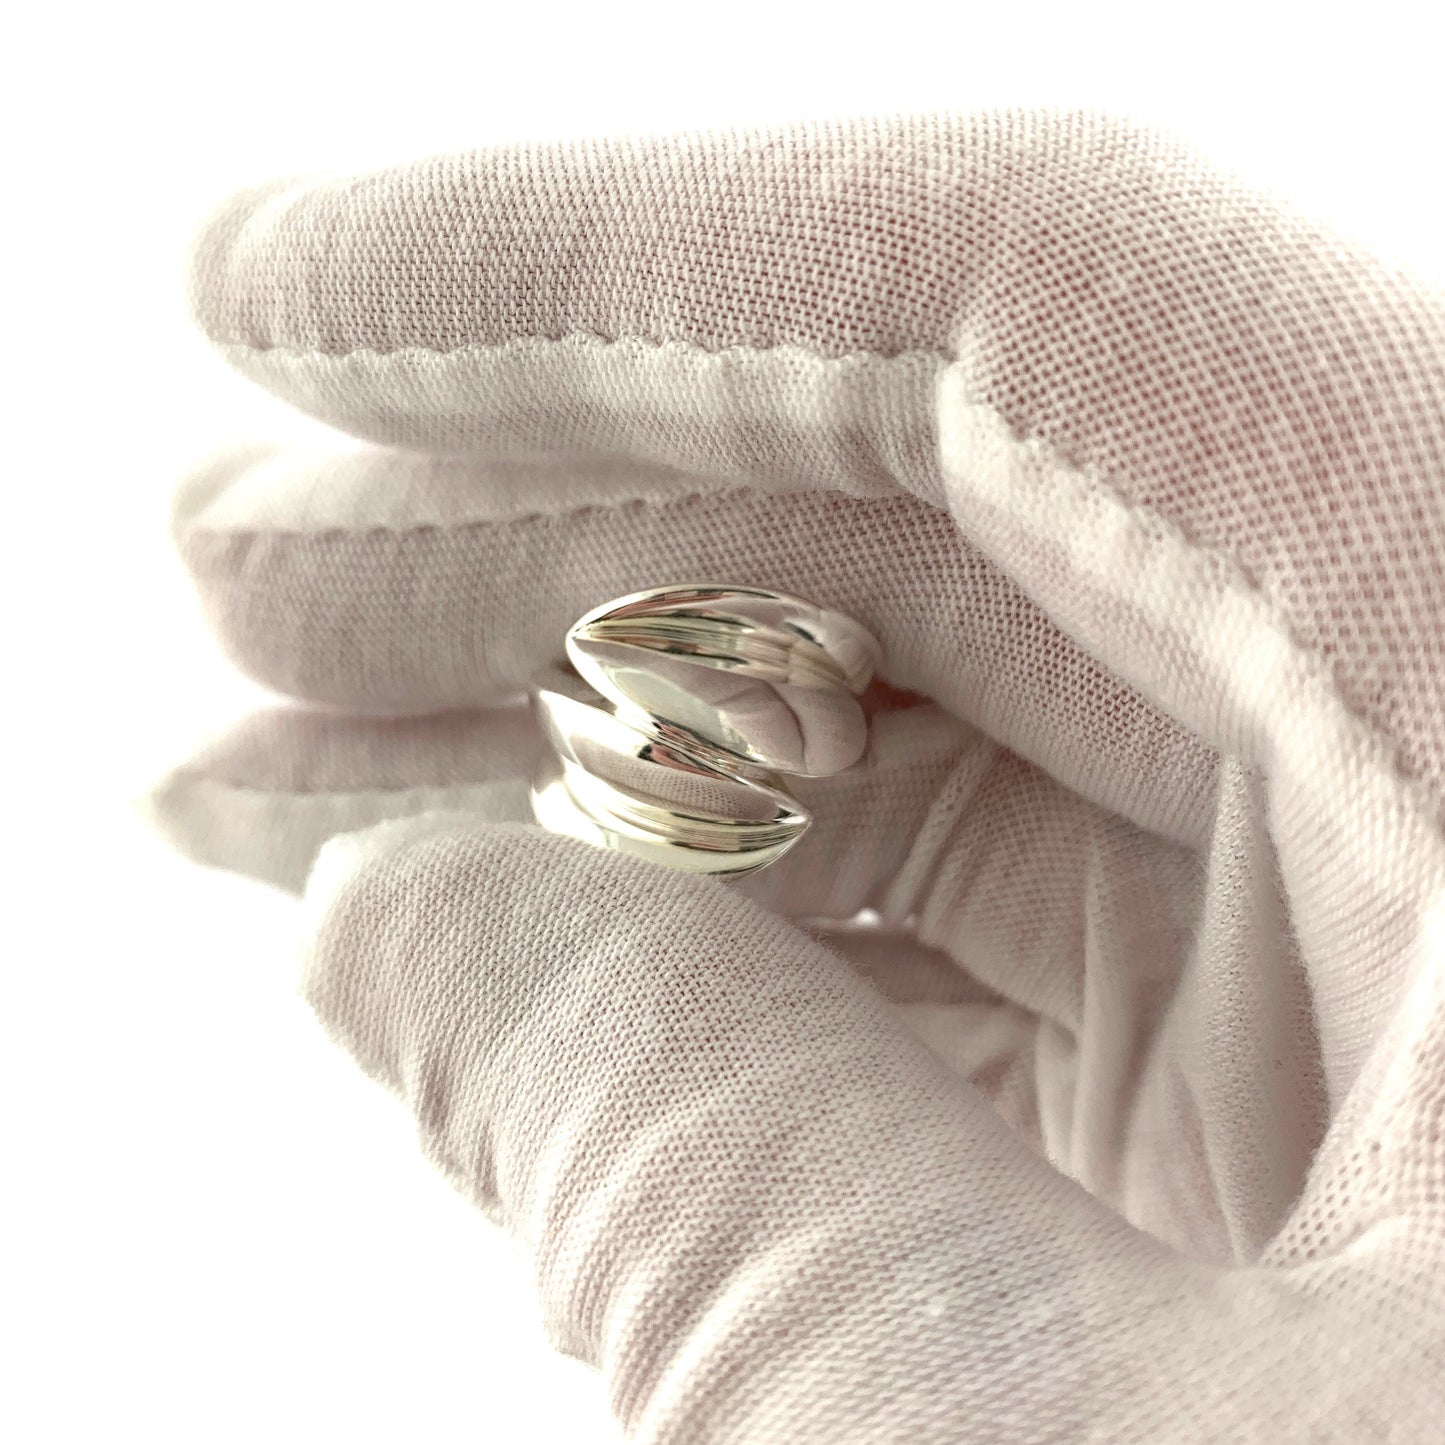 Vintage Sterling Silver Ring Twist Style Size 6.5, PAJ-0110-1646781791 - AriaDesignCollection